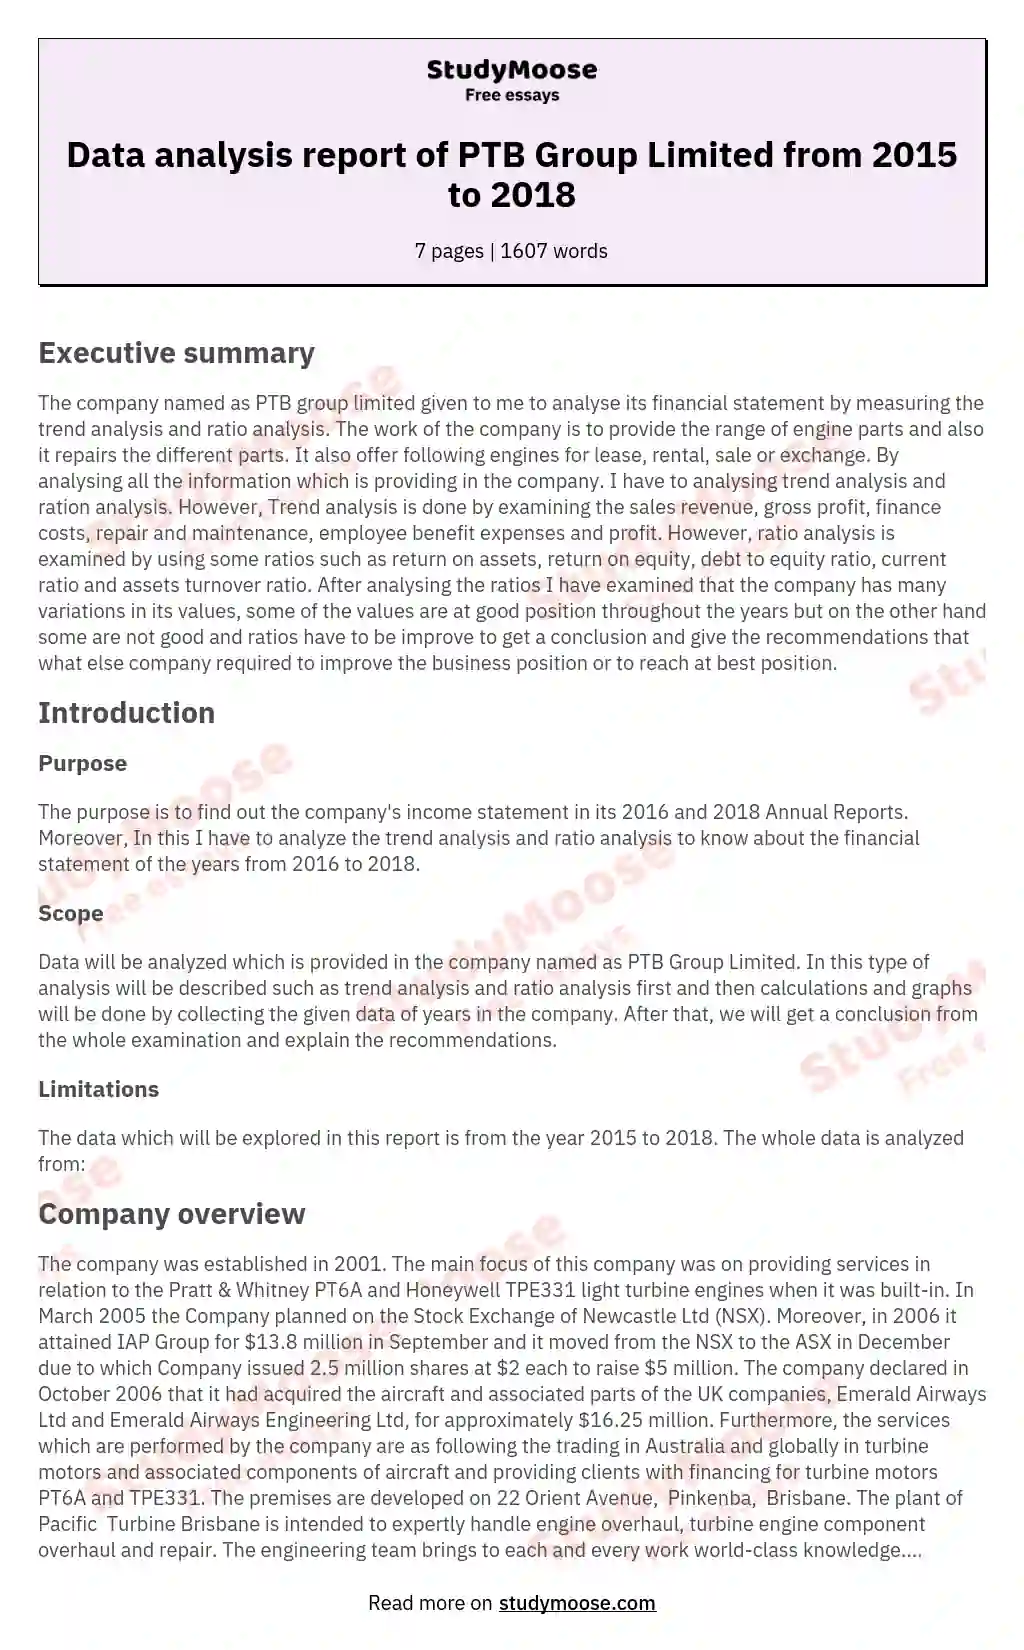 Data analysis report of PTB Group Limited from 2015 to 2018 essay